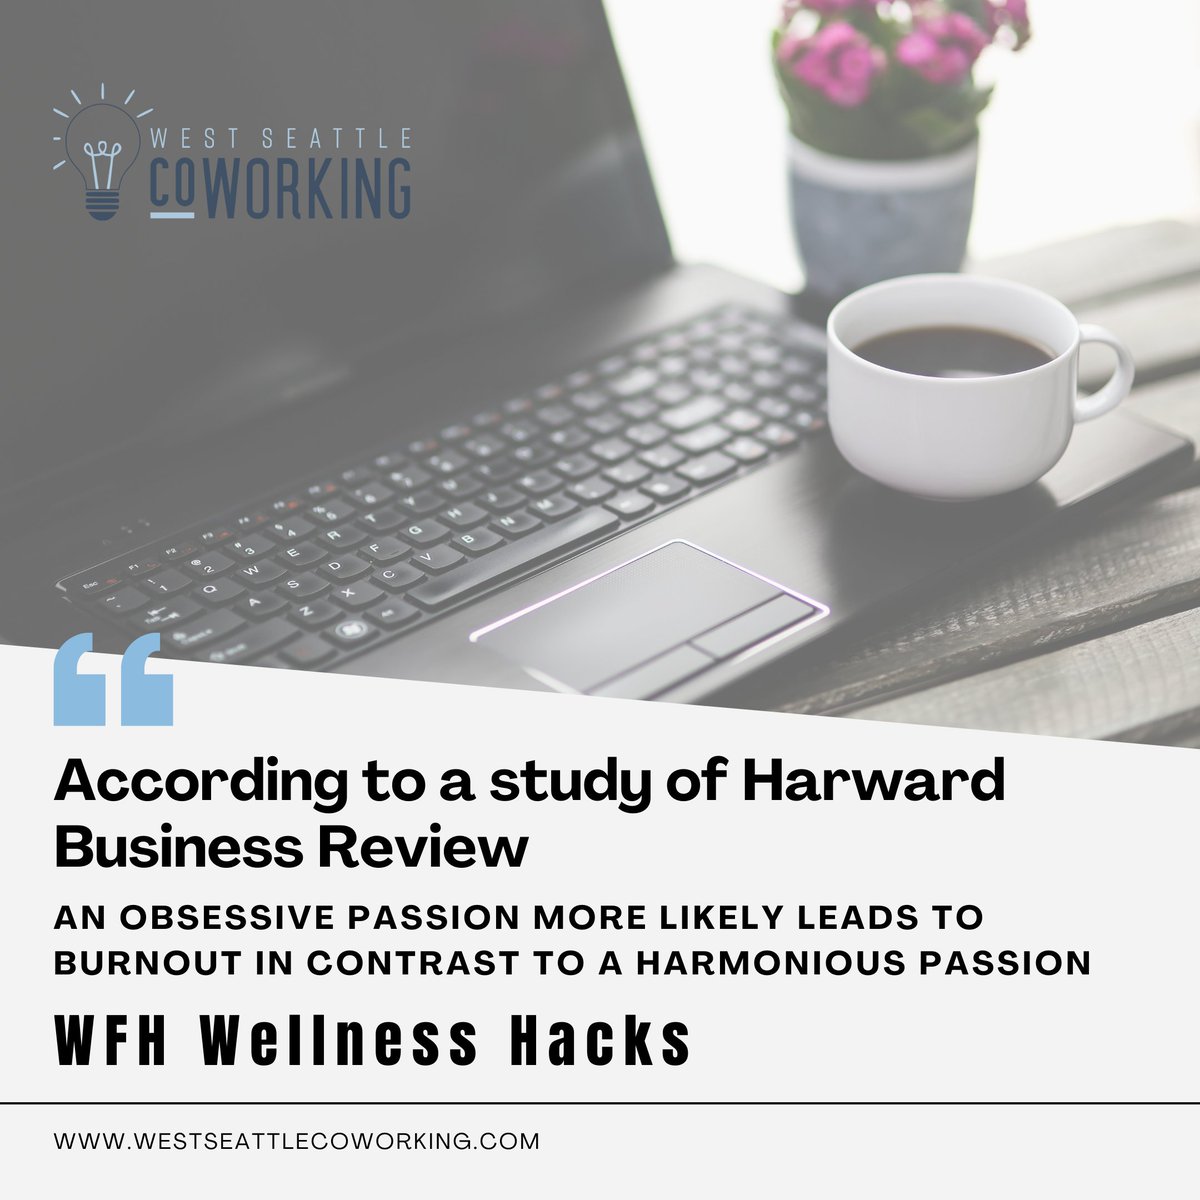 In the world of remote work, passion is a driving force but be careful it can silently turn into a double-edged sword....
👉 zurl.co/kQrQ
 #burnouts  #workburnout #burnouttherapy #wellnesshacks #coworking #coworkinglife #CoworkingSpace #westseattle #workfromhome